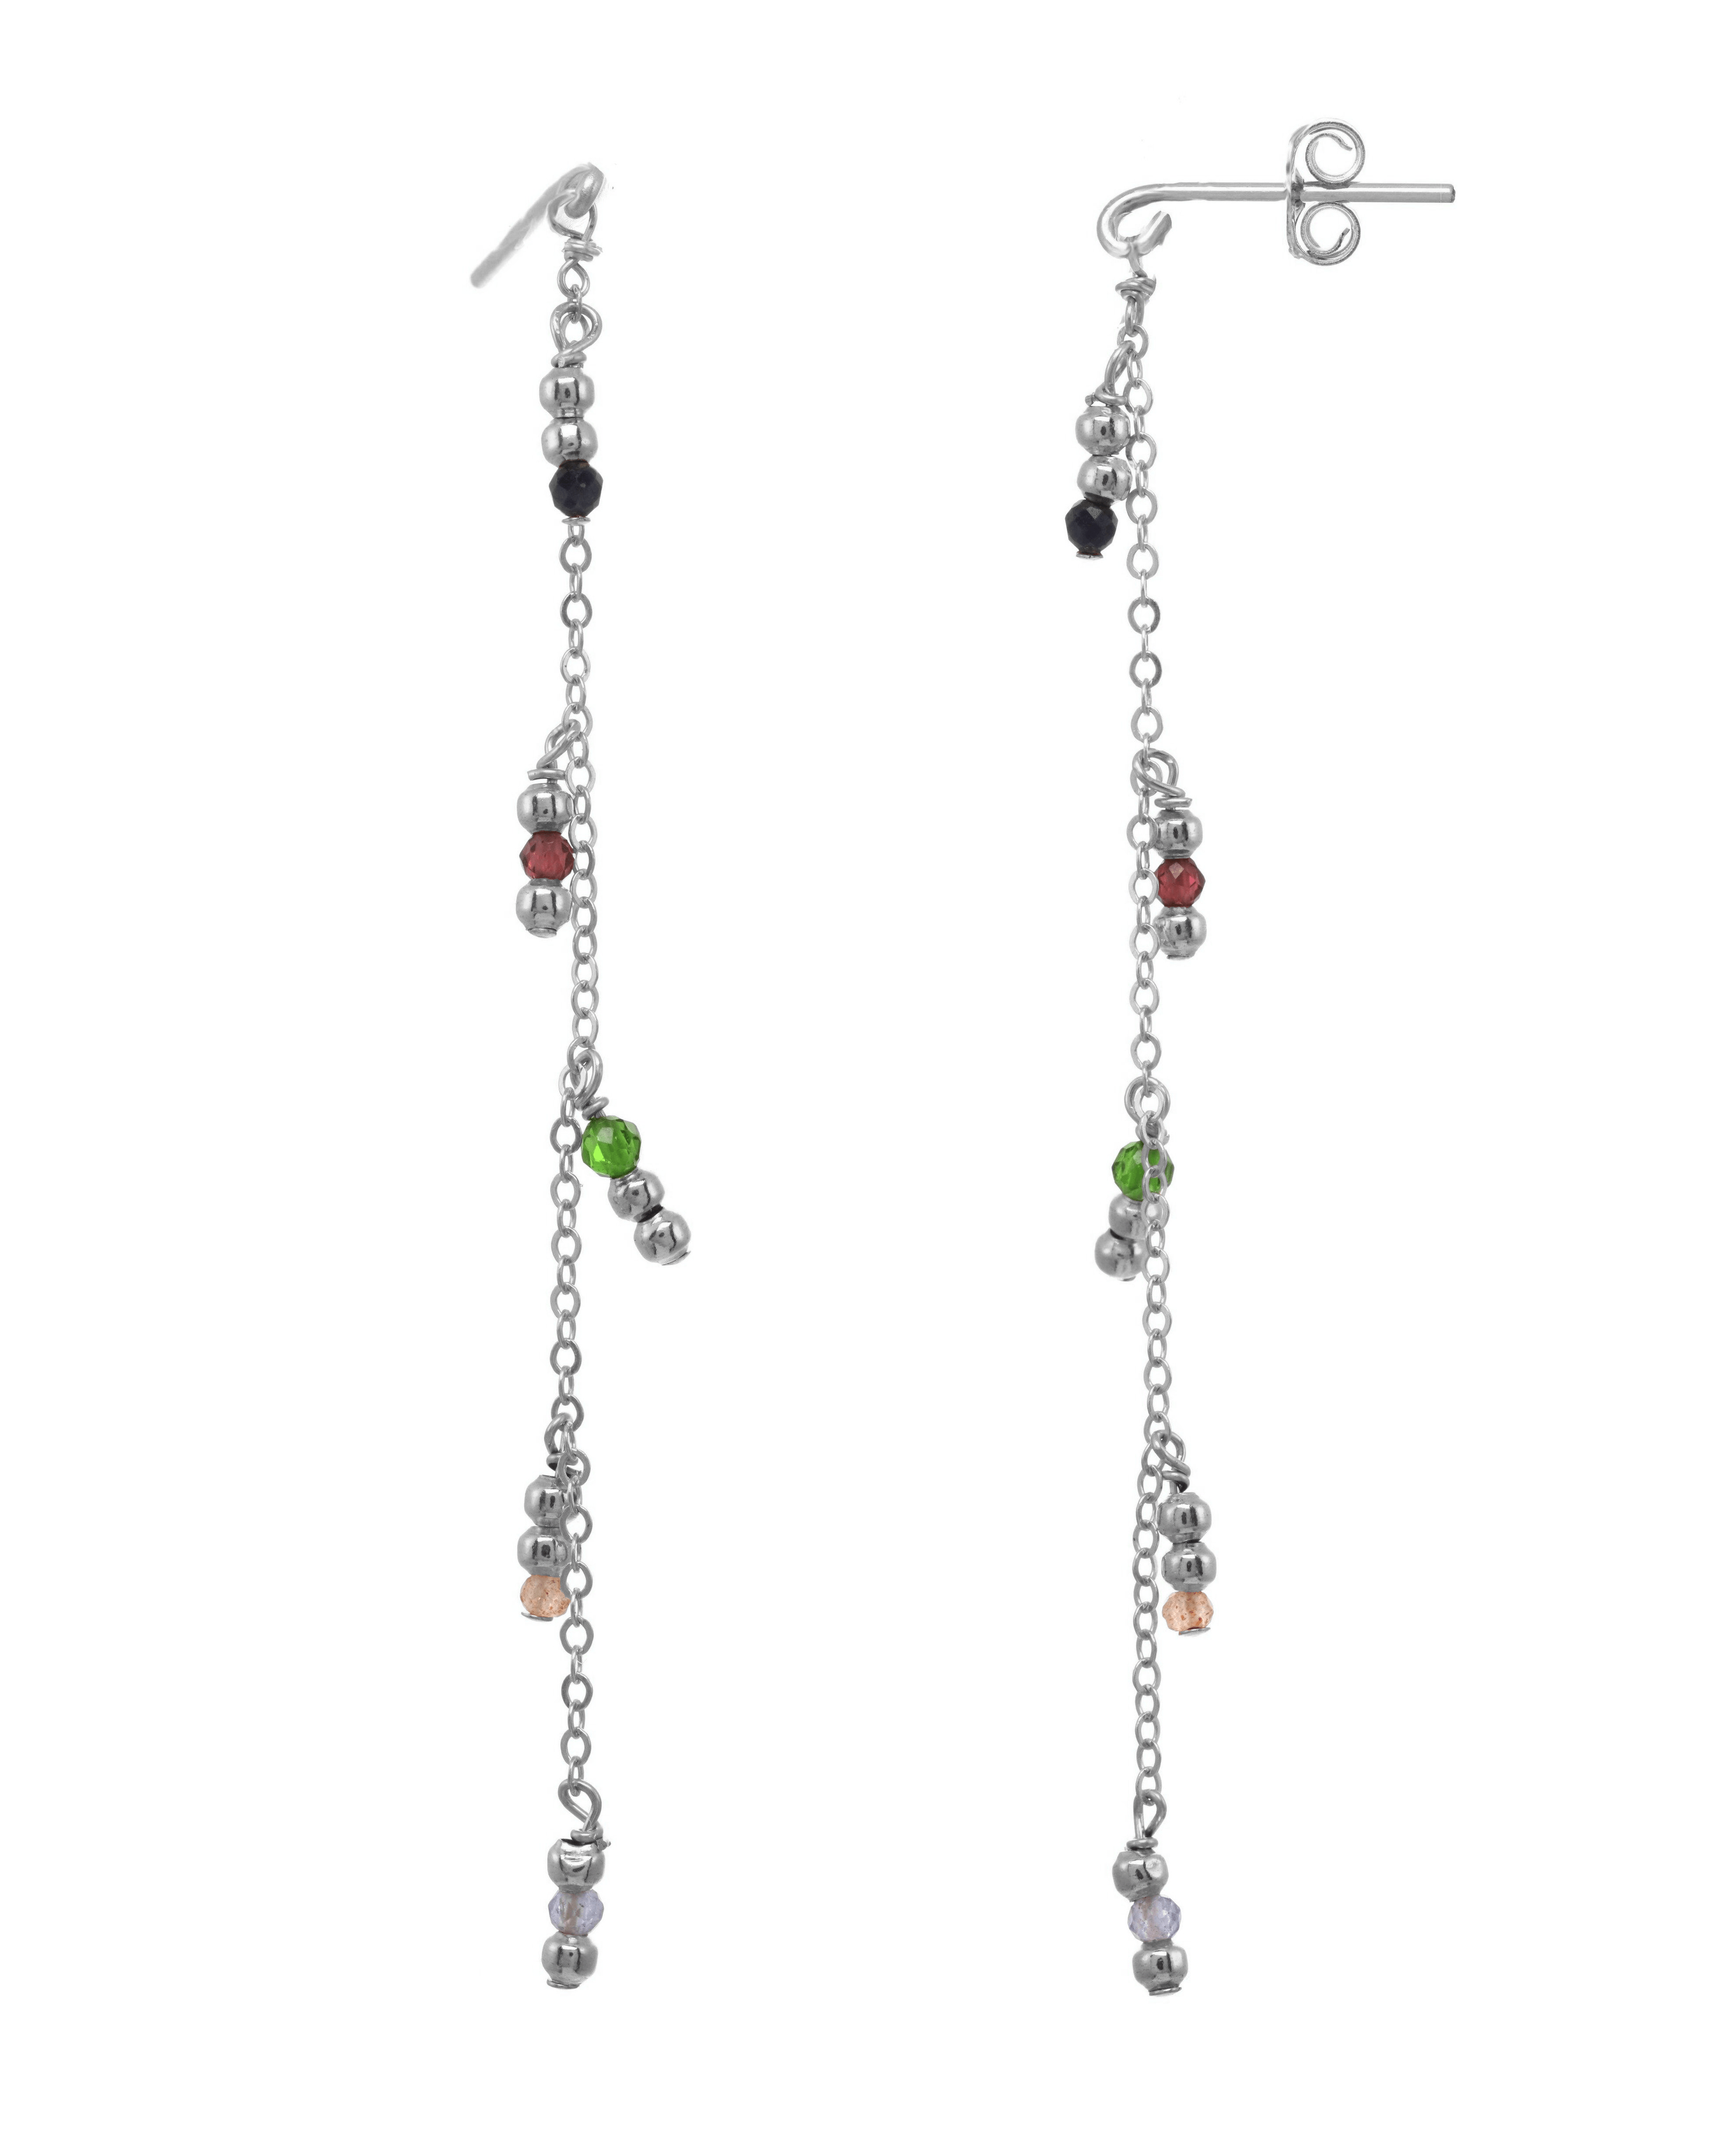 Samara Earrings by KOZAKH. Drop earrings, crafted in Sterling Silver, featuring 2mm Seamless gold beads and faceted 2mm Aquamarine, Garnet, Imperial Topaz, Emerald, Sapphire and Tanzanite.